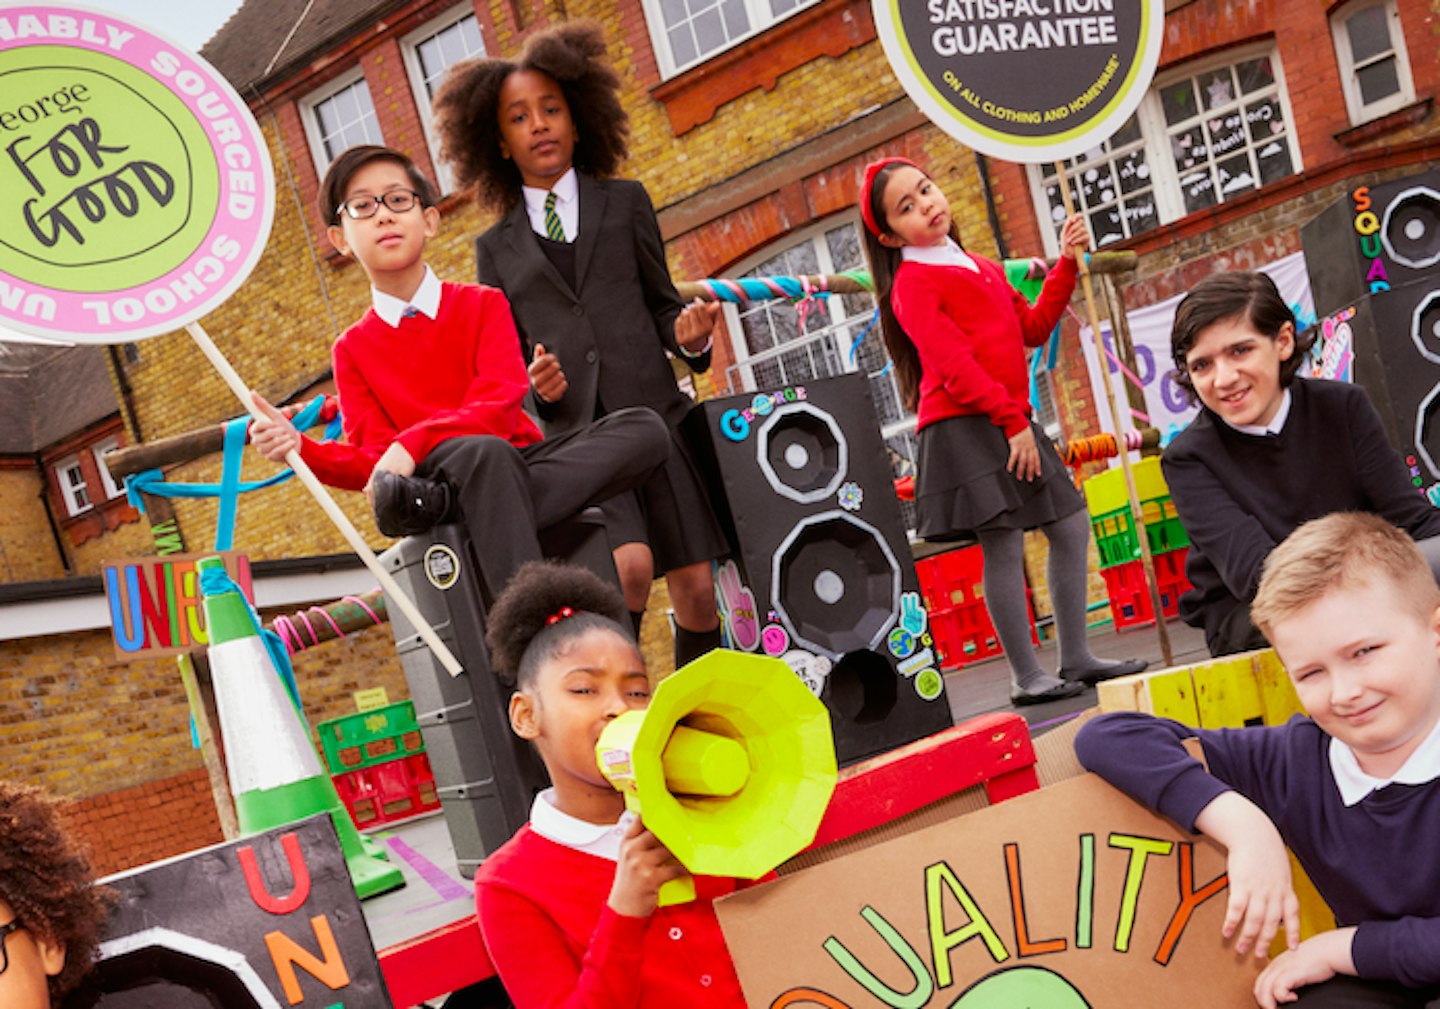 George at Asda launches major back-to-school campaign